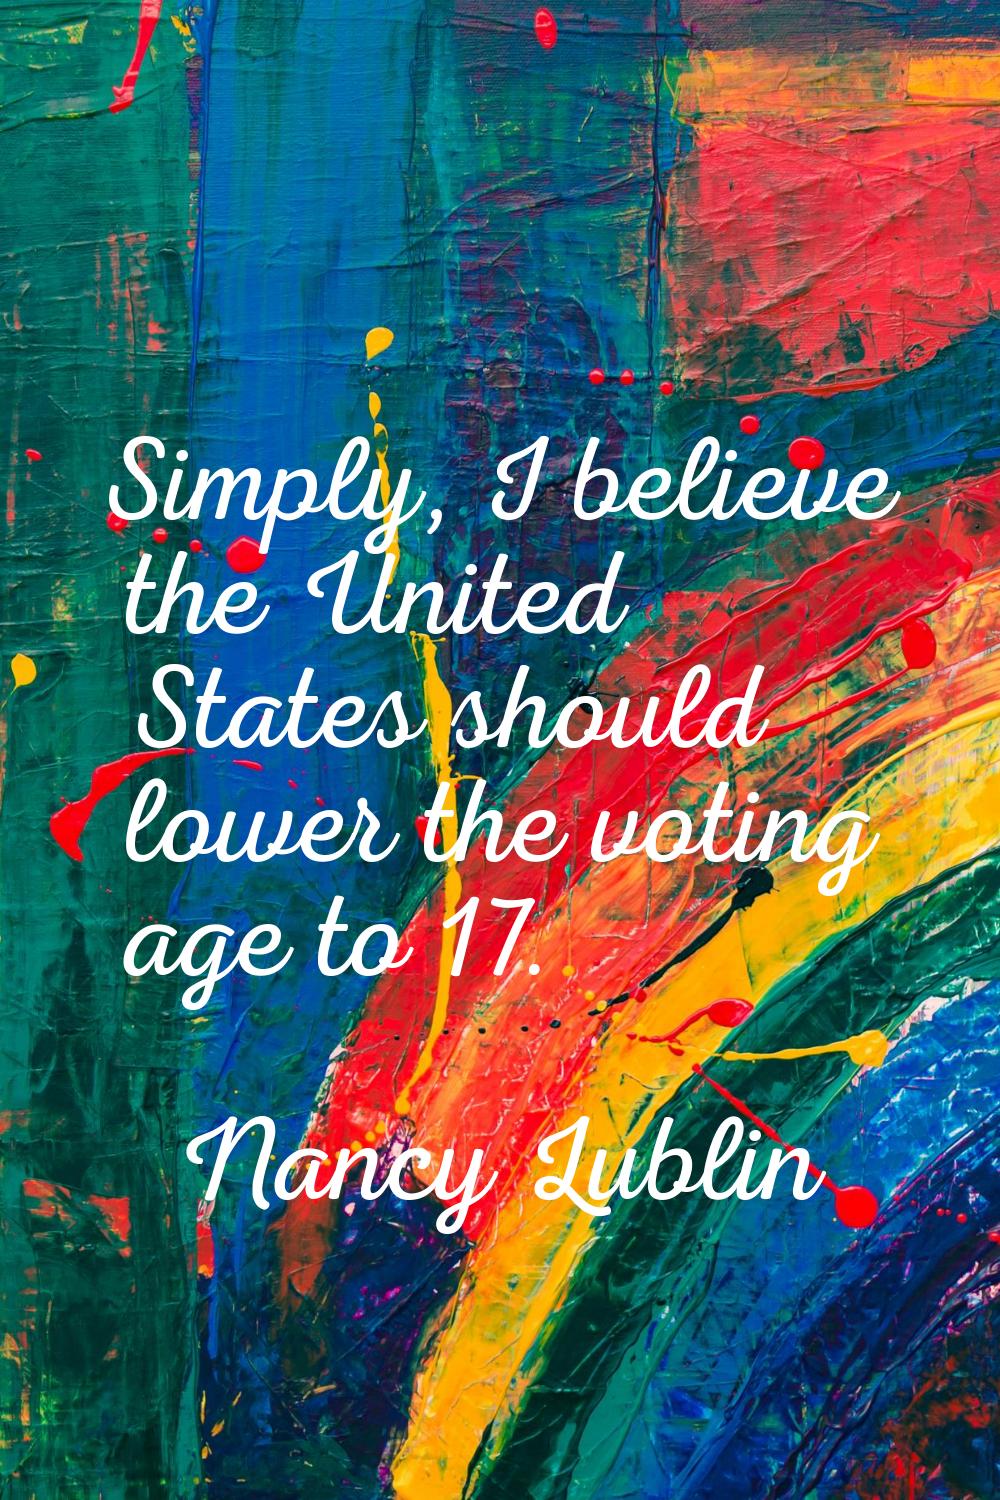 Simply, I believe the United States should lower the voting age to 17.